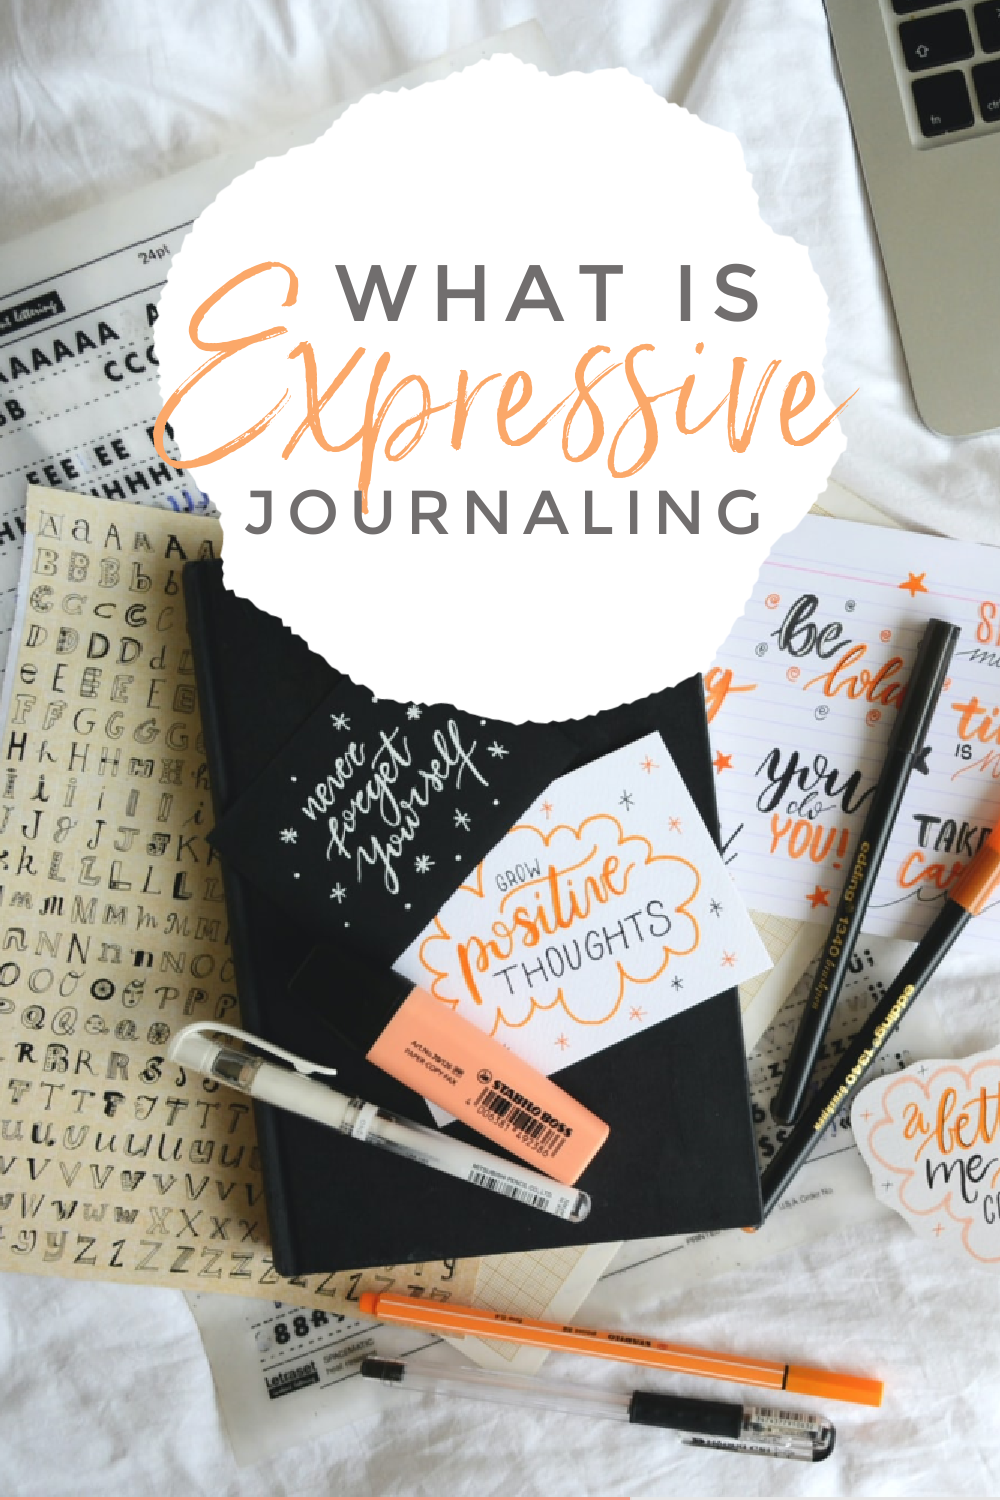 What is Expressive Journaling